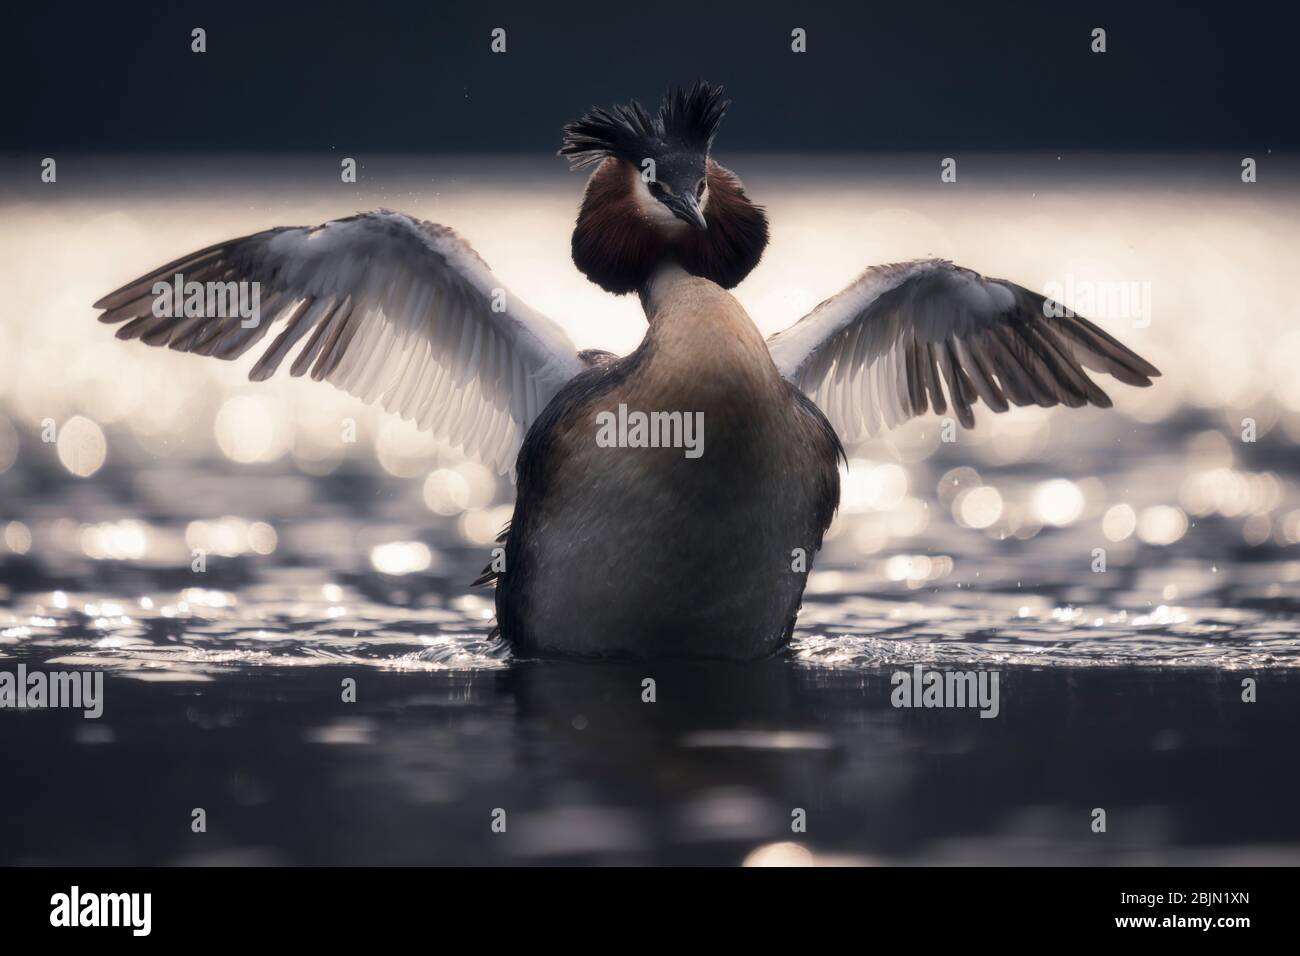 Great crested grebe on a lake flapping its wings, New Zealand Stock Photo